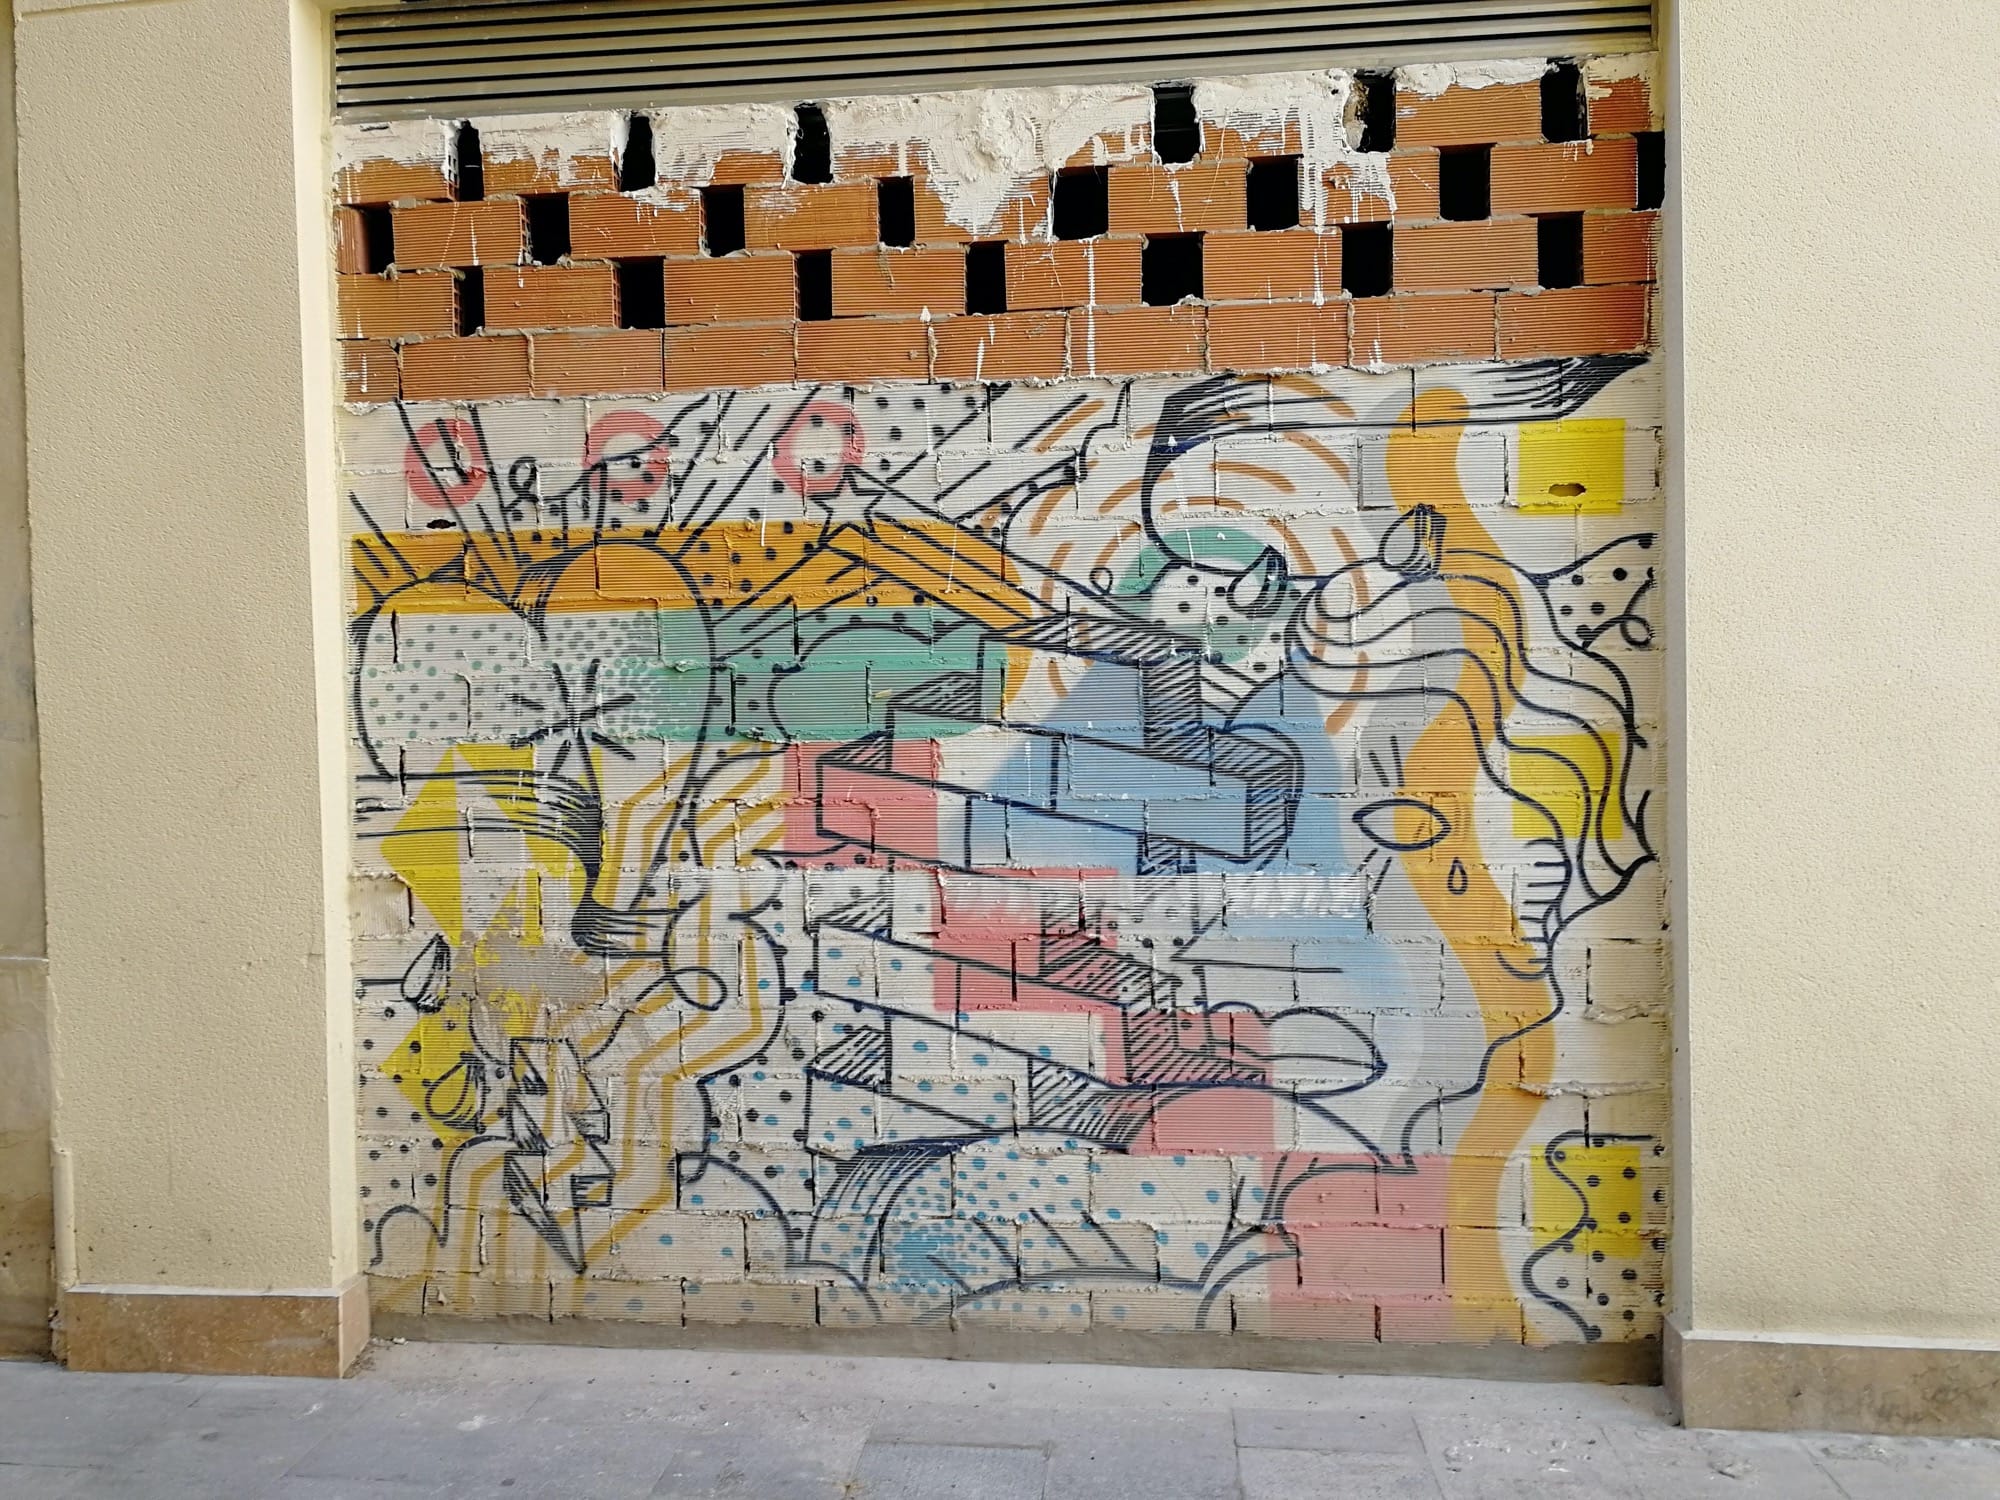 Graffiti 3647  captured by Rabot in València Spain